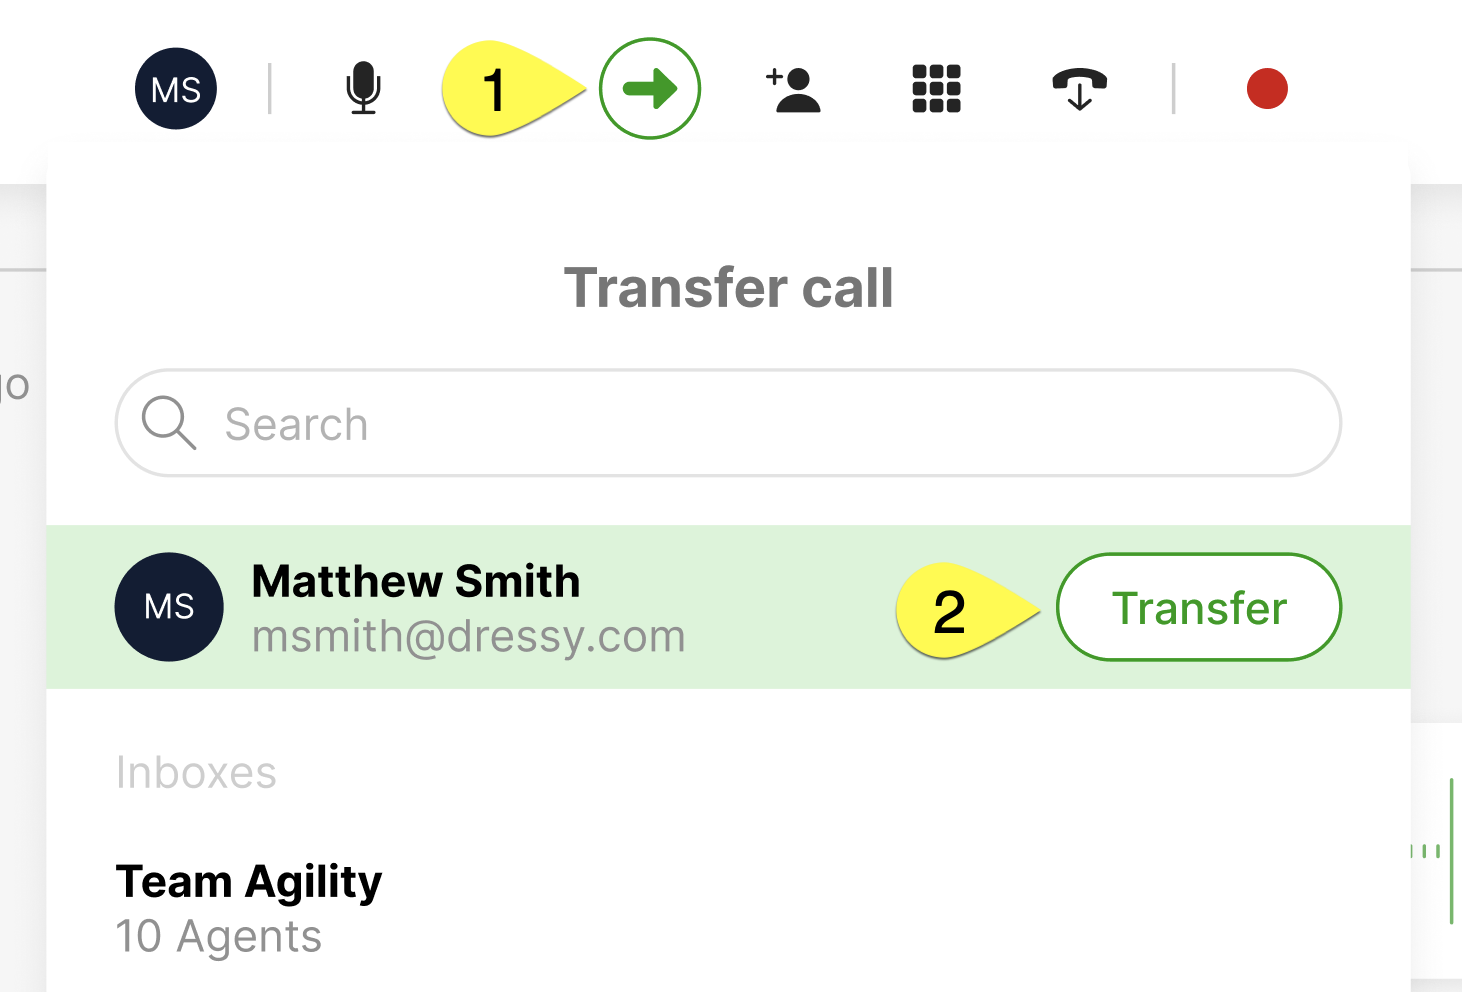 Click Transfer next to who you want to transfer the call to